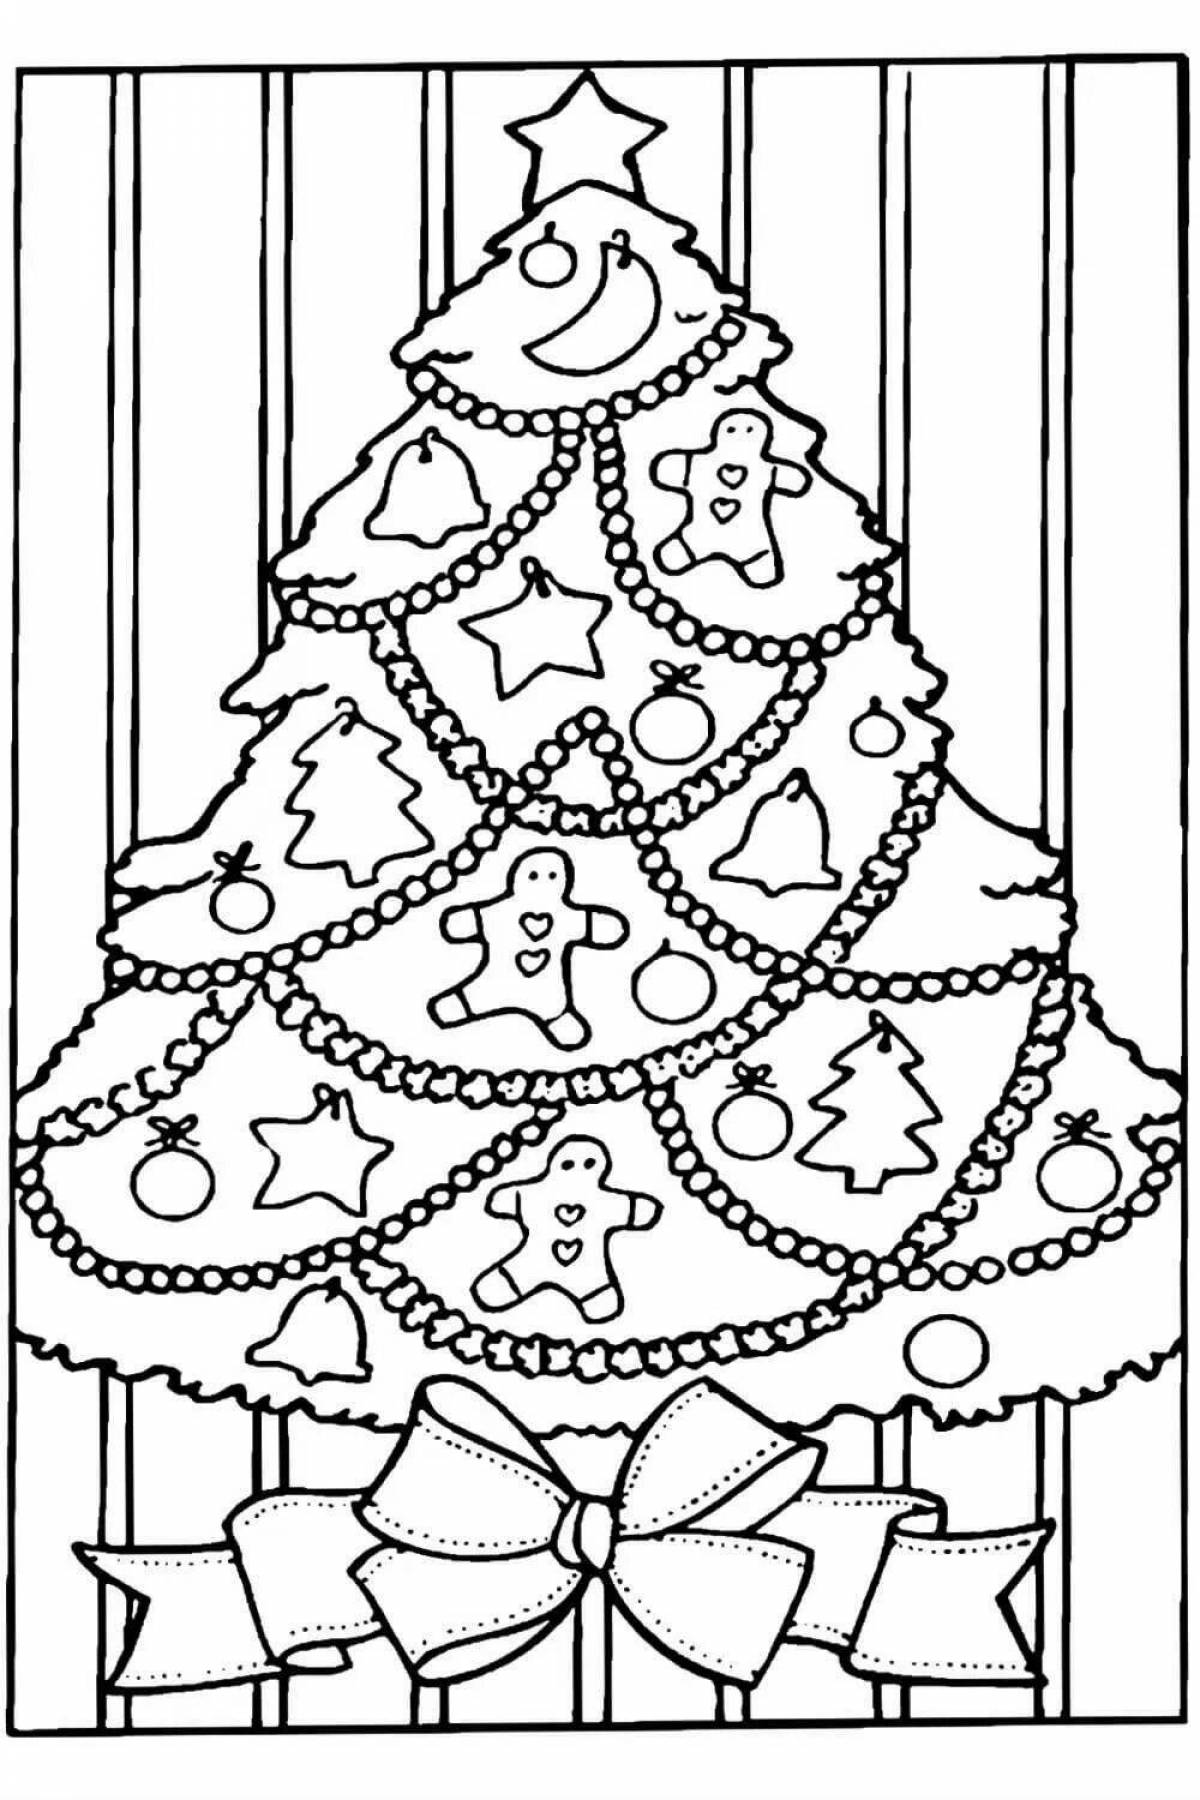 Amazing Christmas coloring book